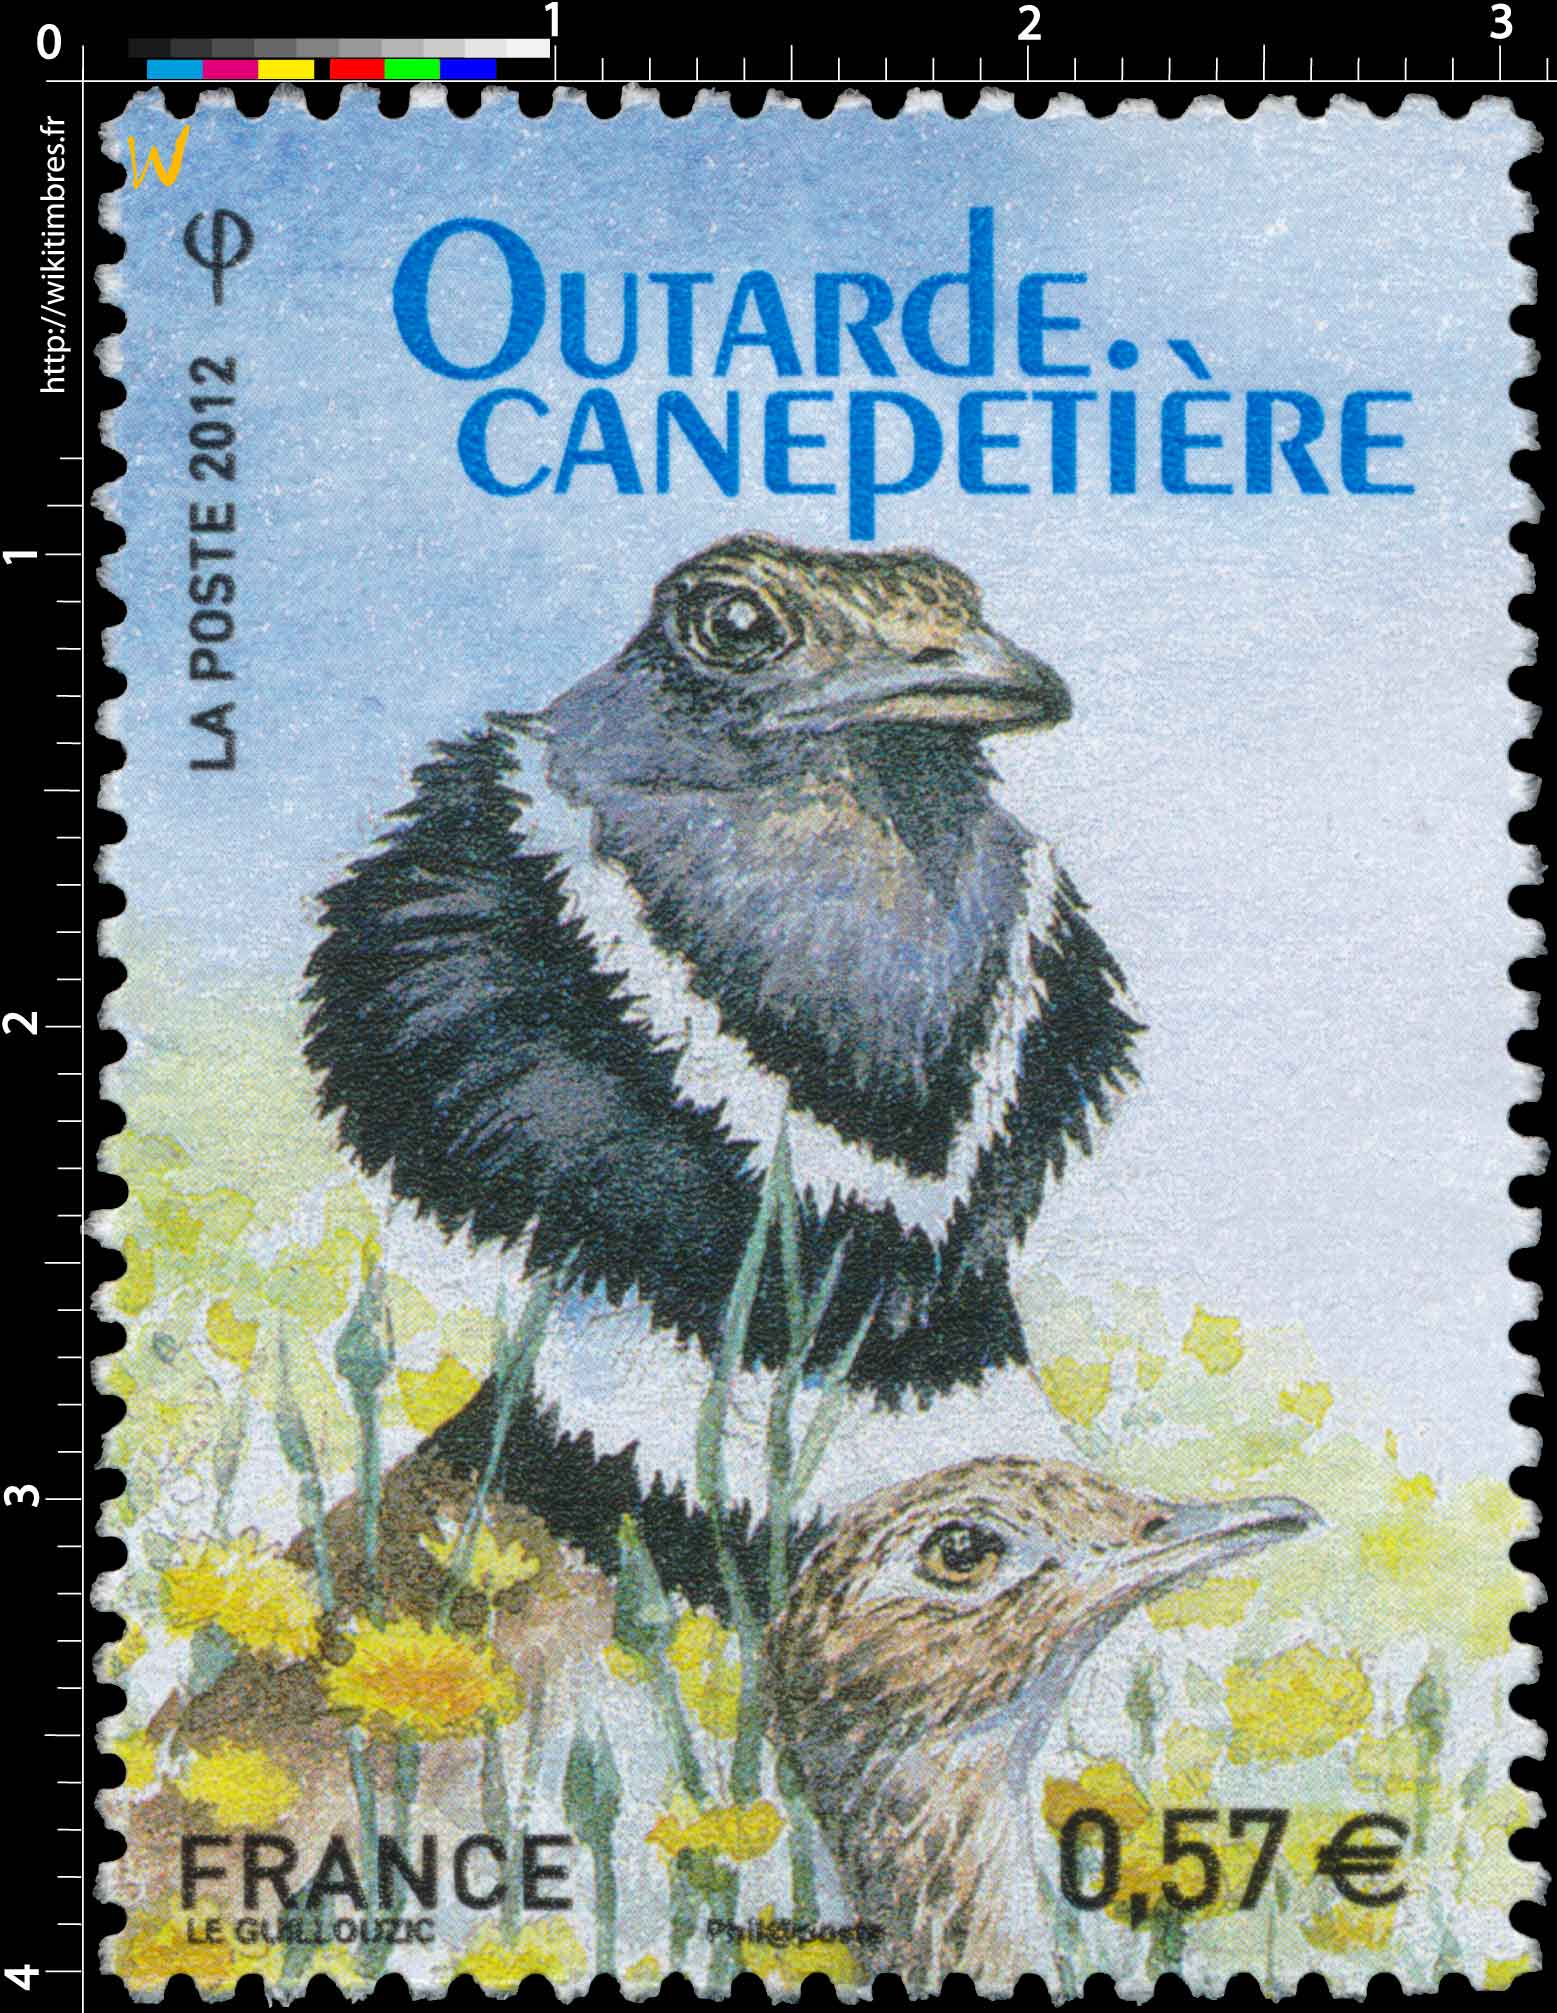 2012 Outarde canepetière